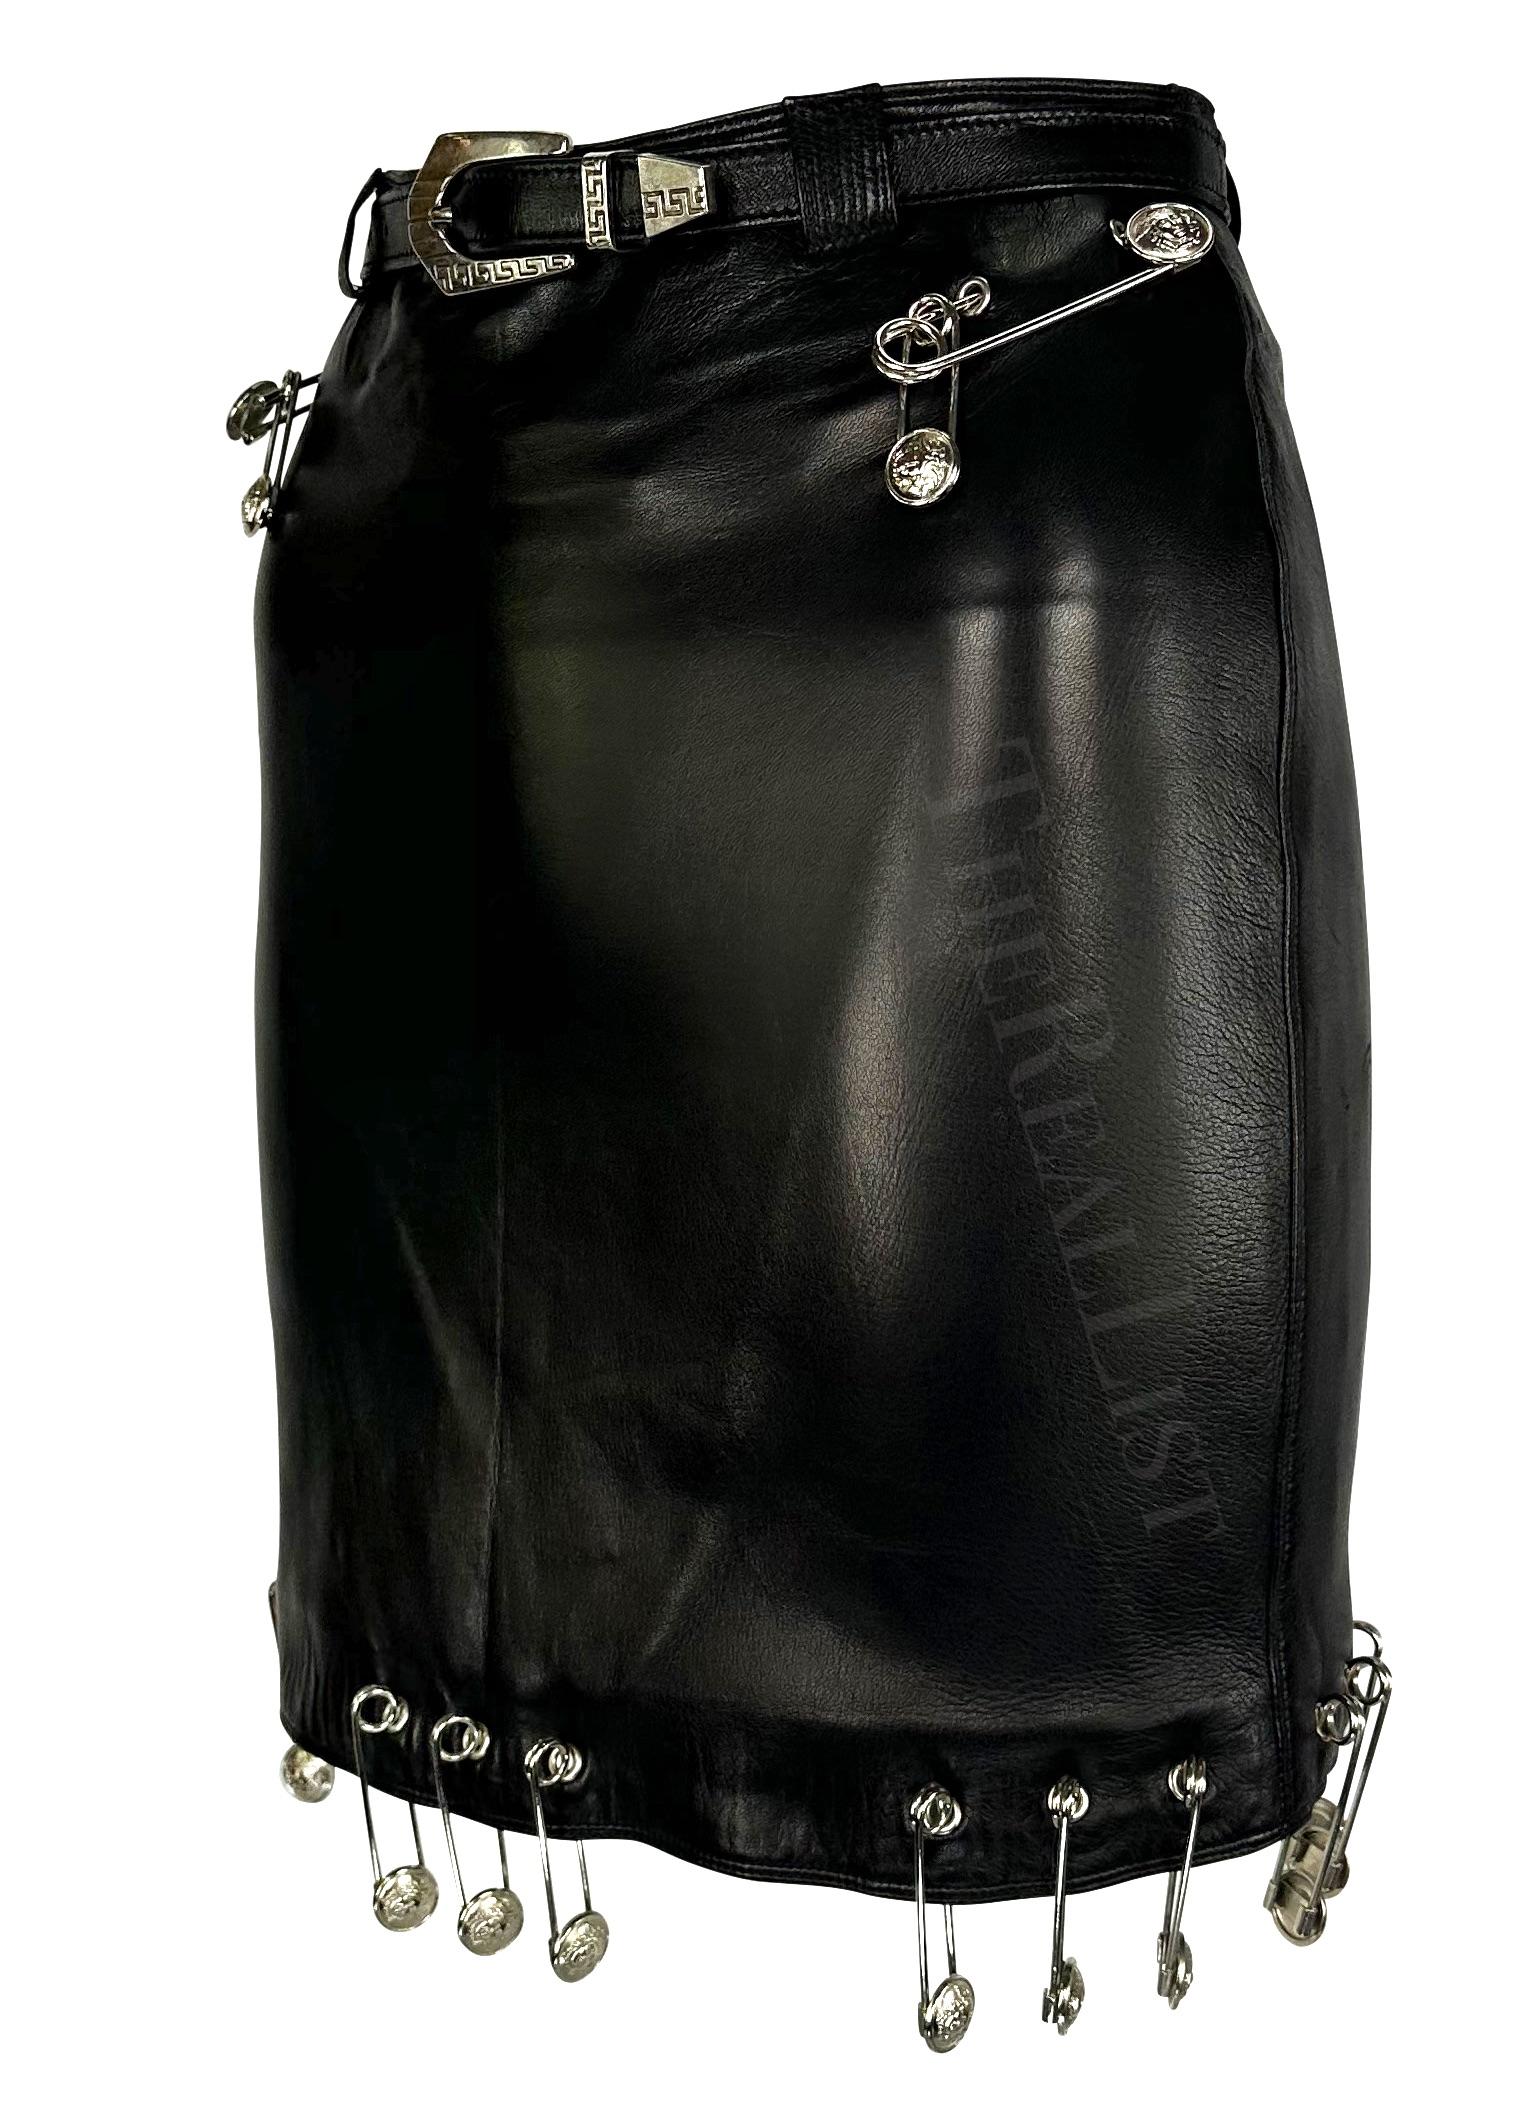 S/S 1994 Gianni Versace Safety Pin Medusa Pierced Black Leather Belted Skirt For Sale 3